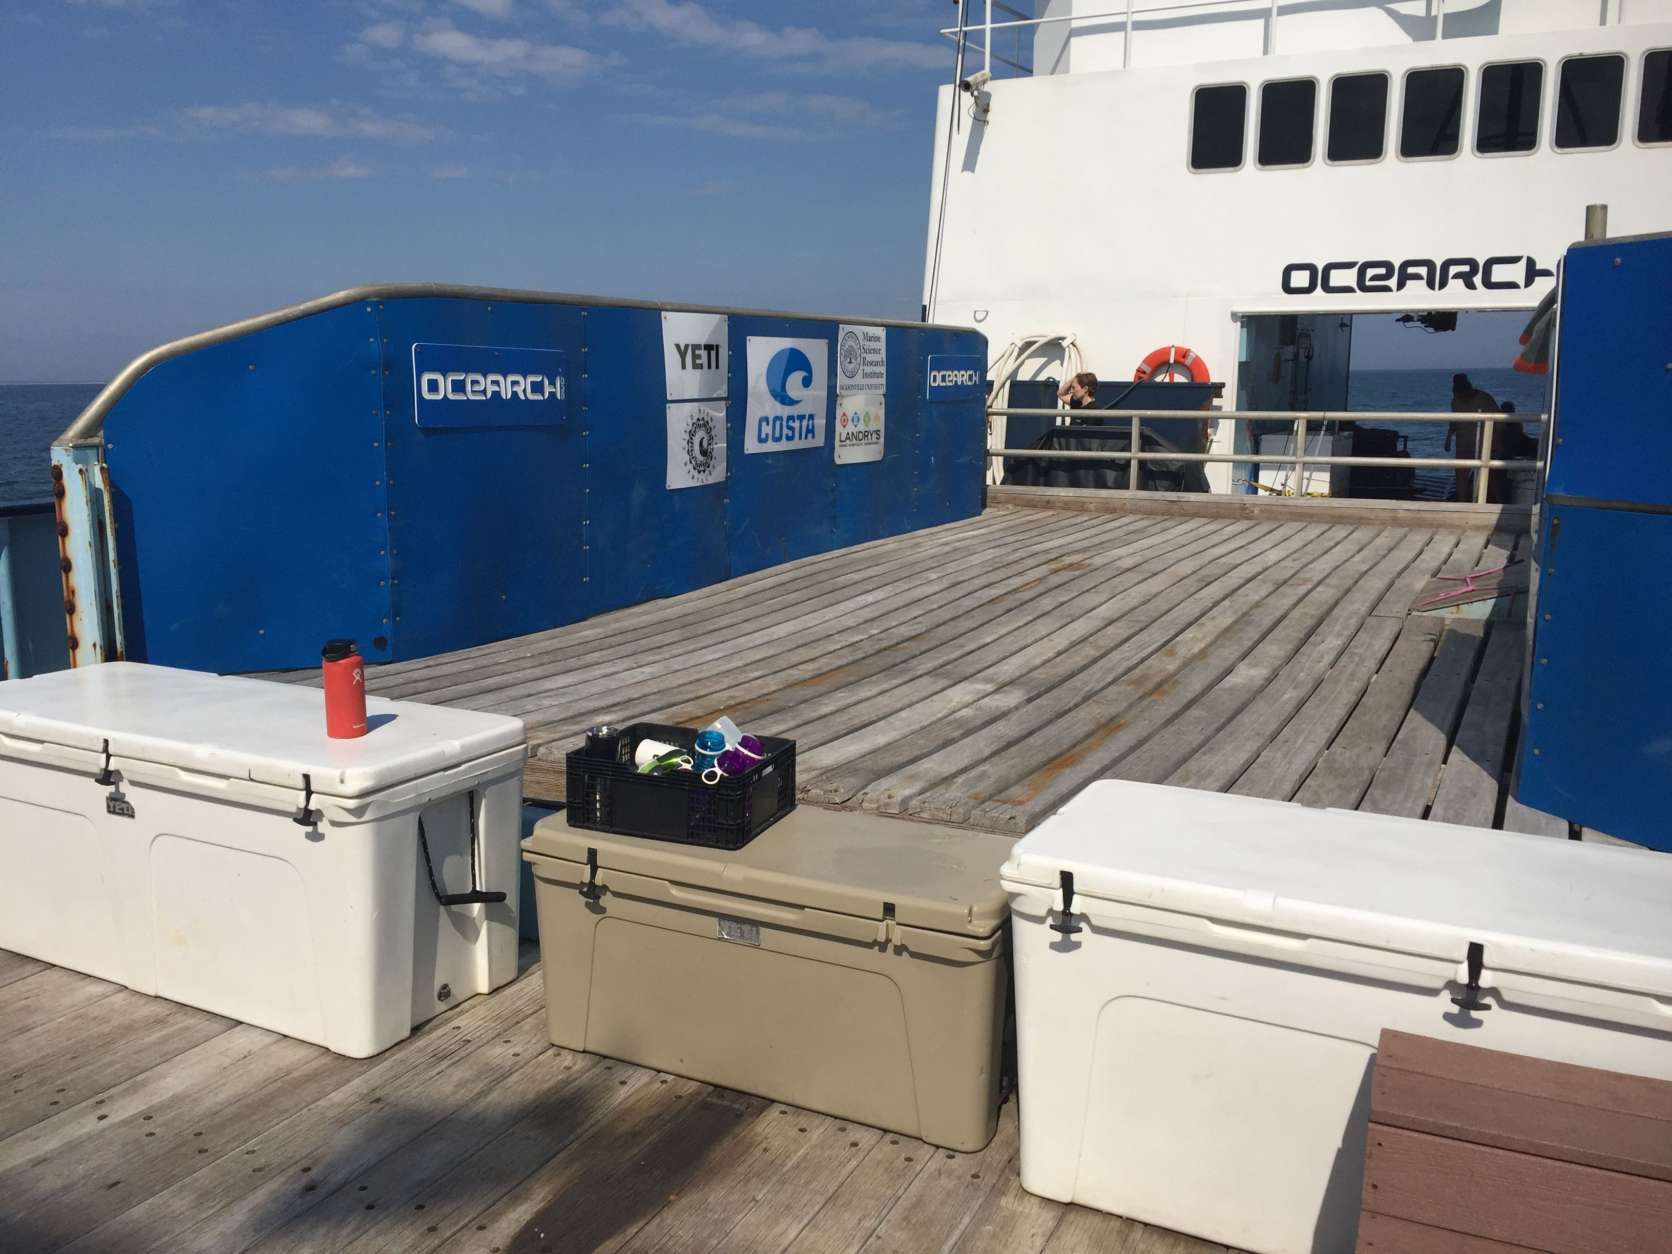 The OCEARCH is a 126-foot research vessel that just wrapped up its 29th shark tagging expedition along the mid-Atlantic coast. (WTOP/Michelle Basch)